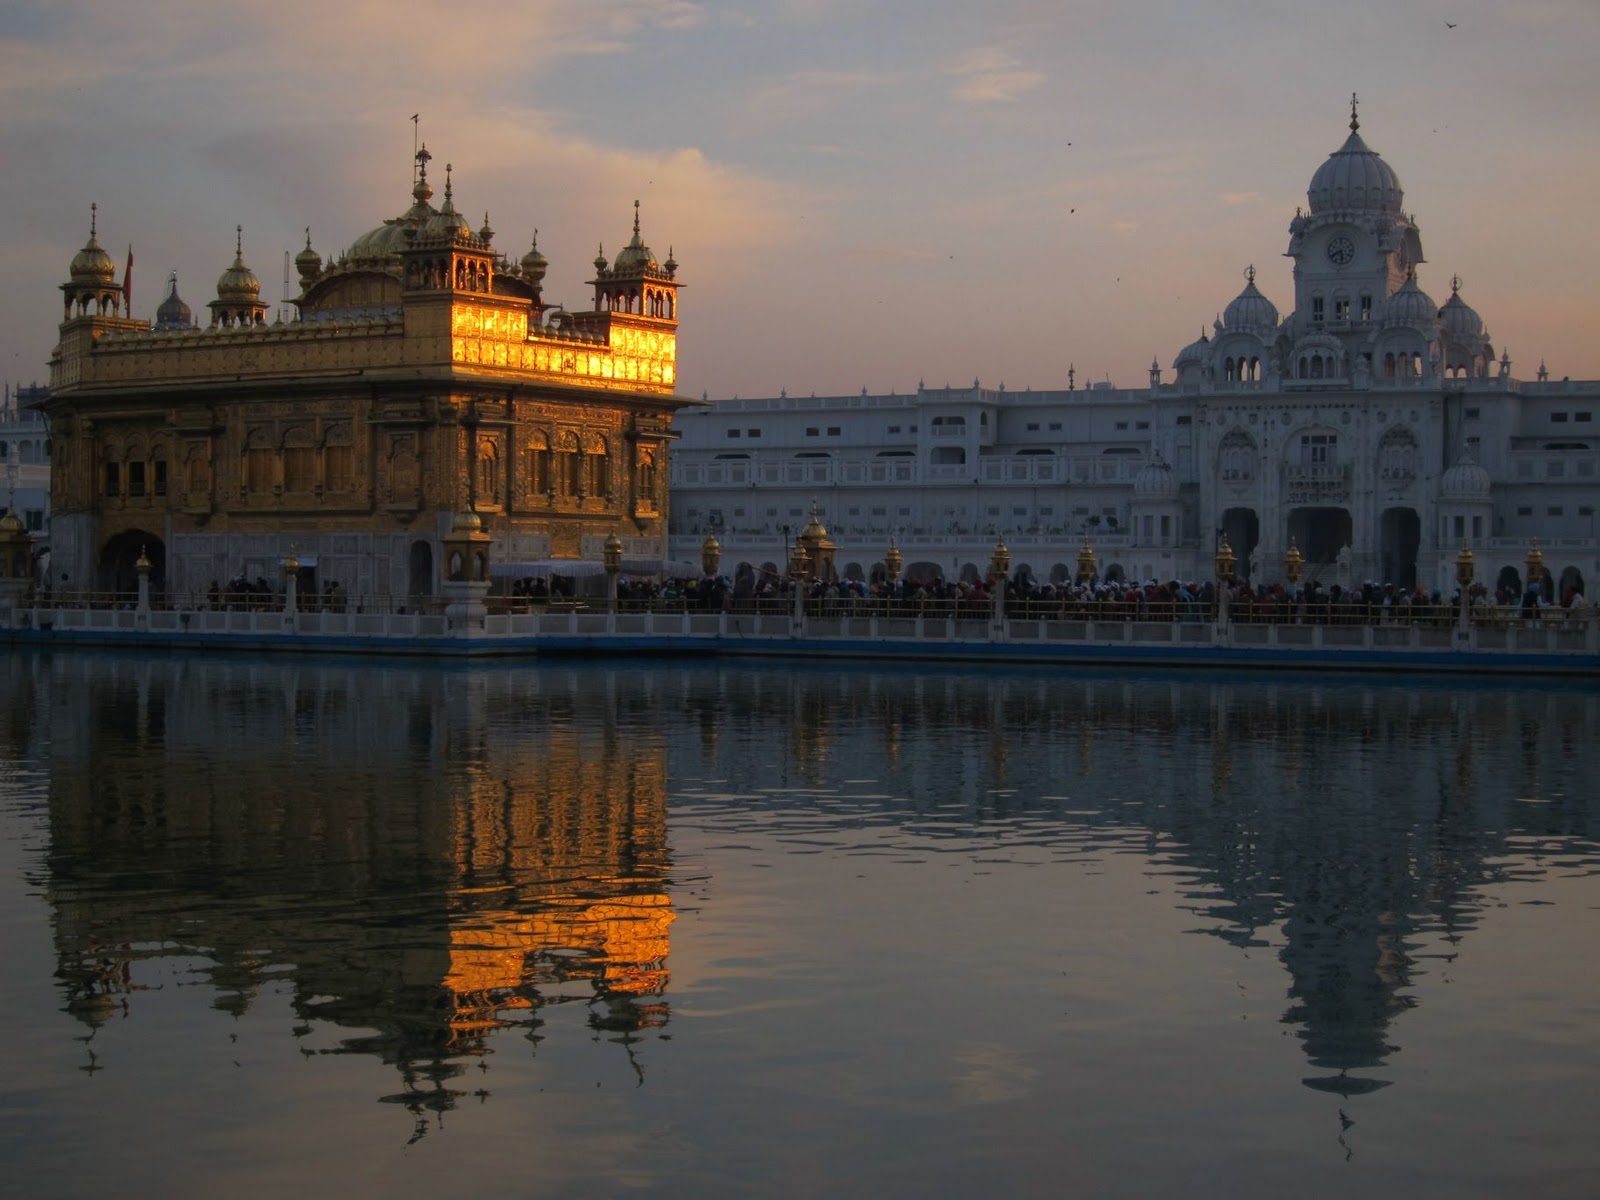 Worldtour 2011 - 2012: 27th January: Sunset on the Golden Temple